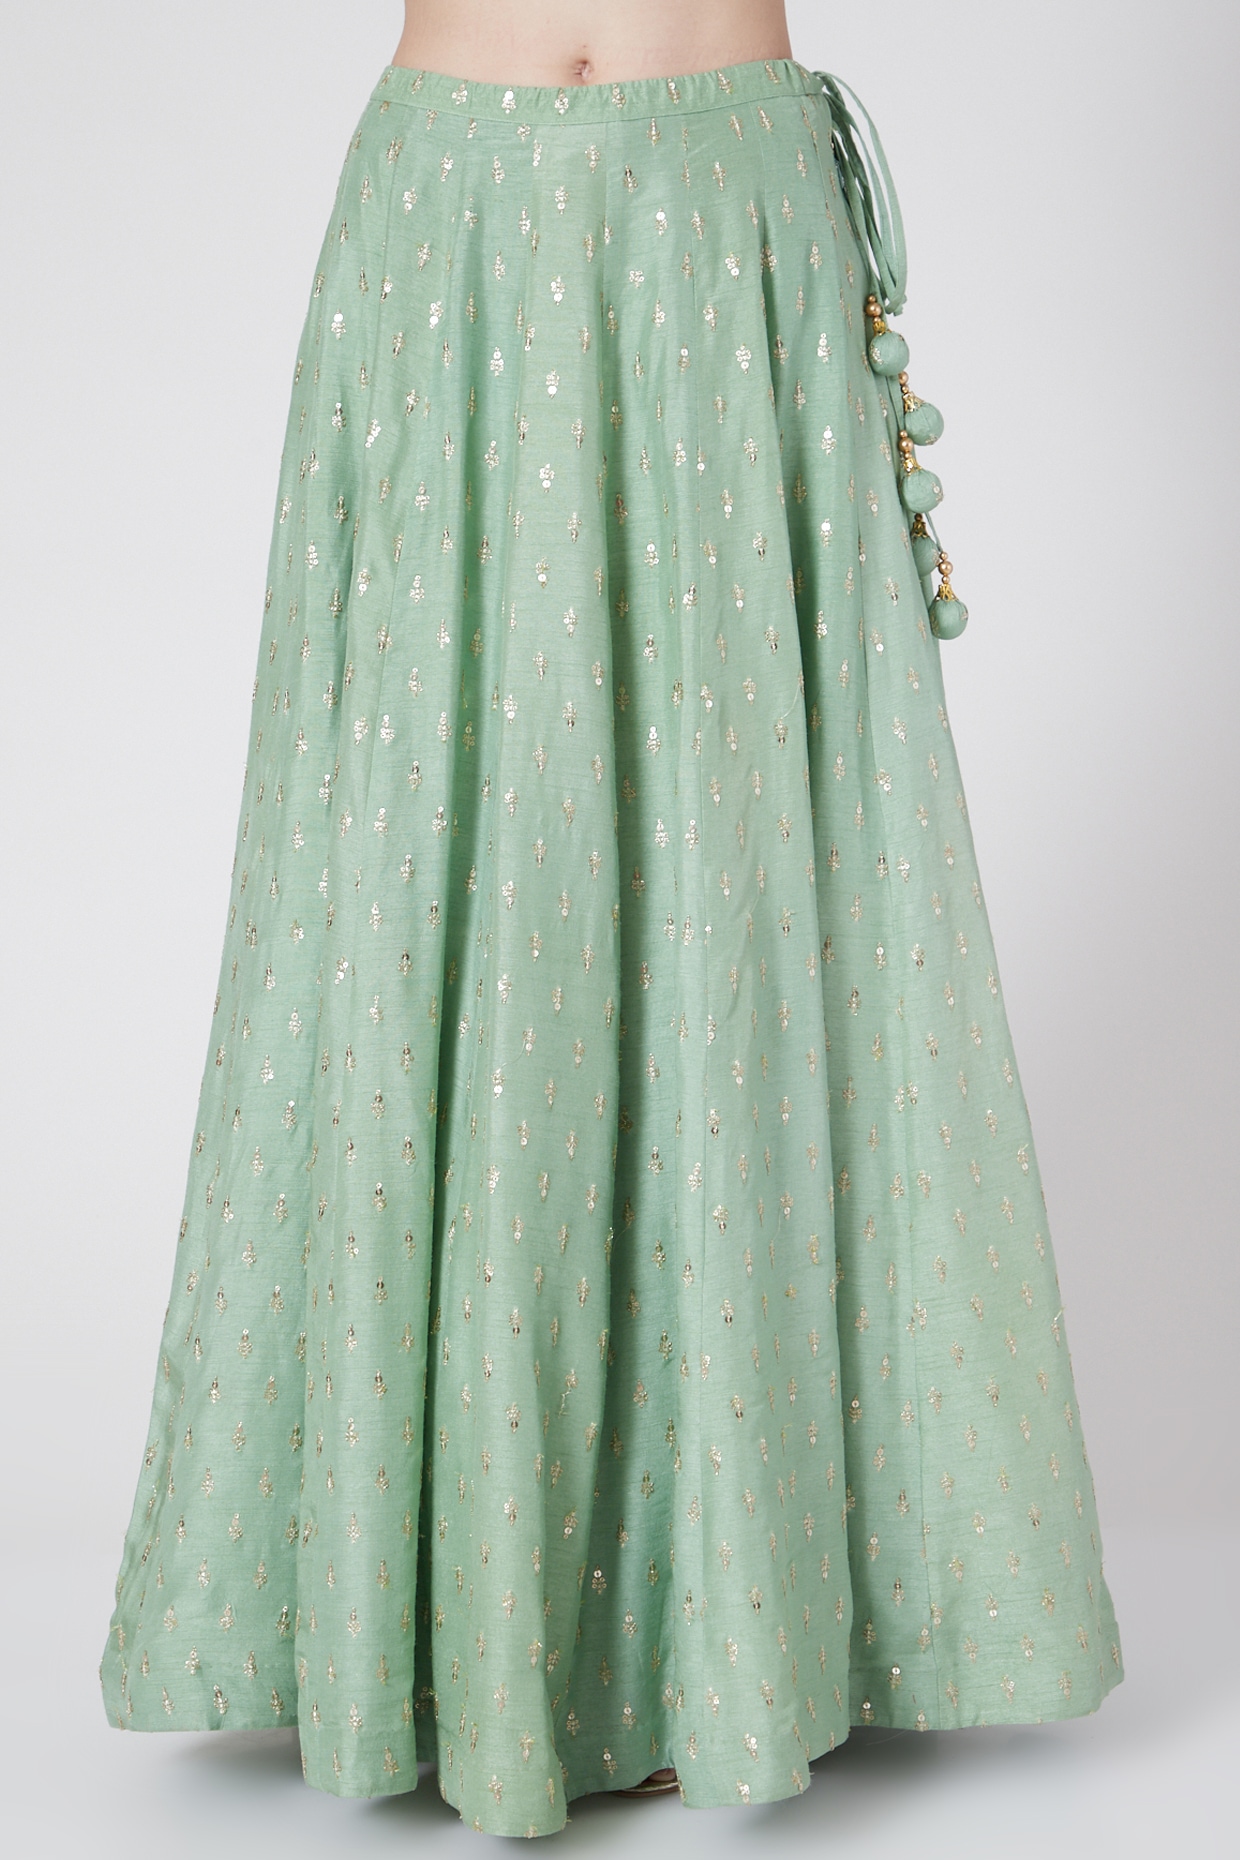 green embroidered skirt